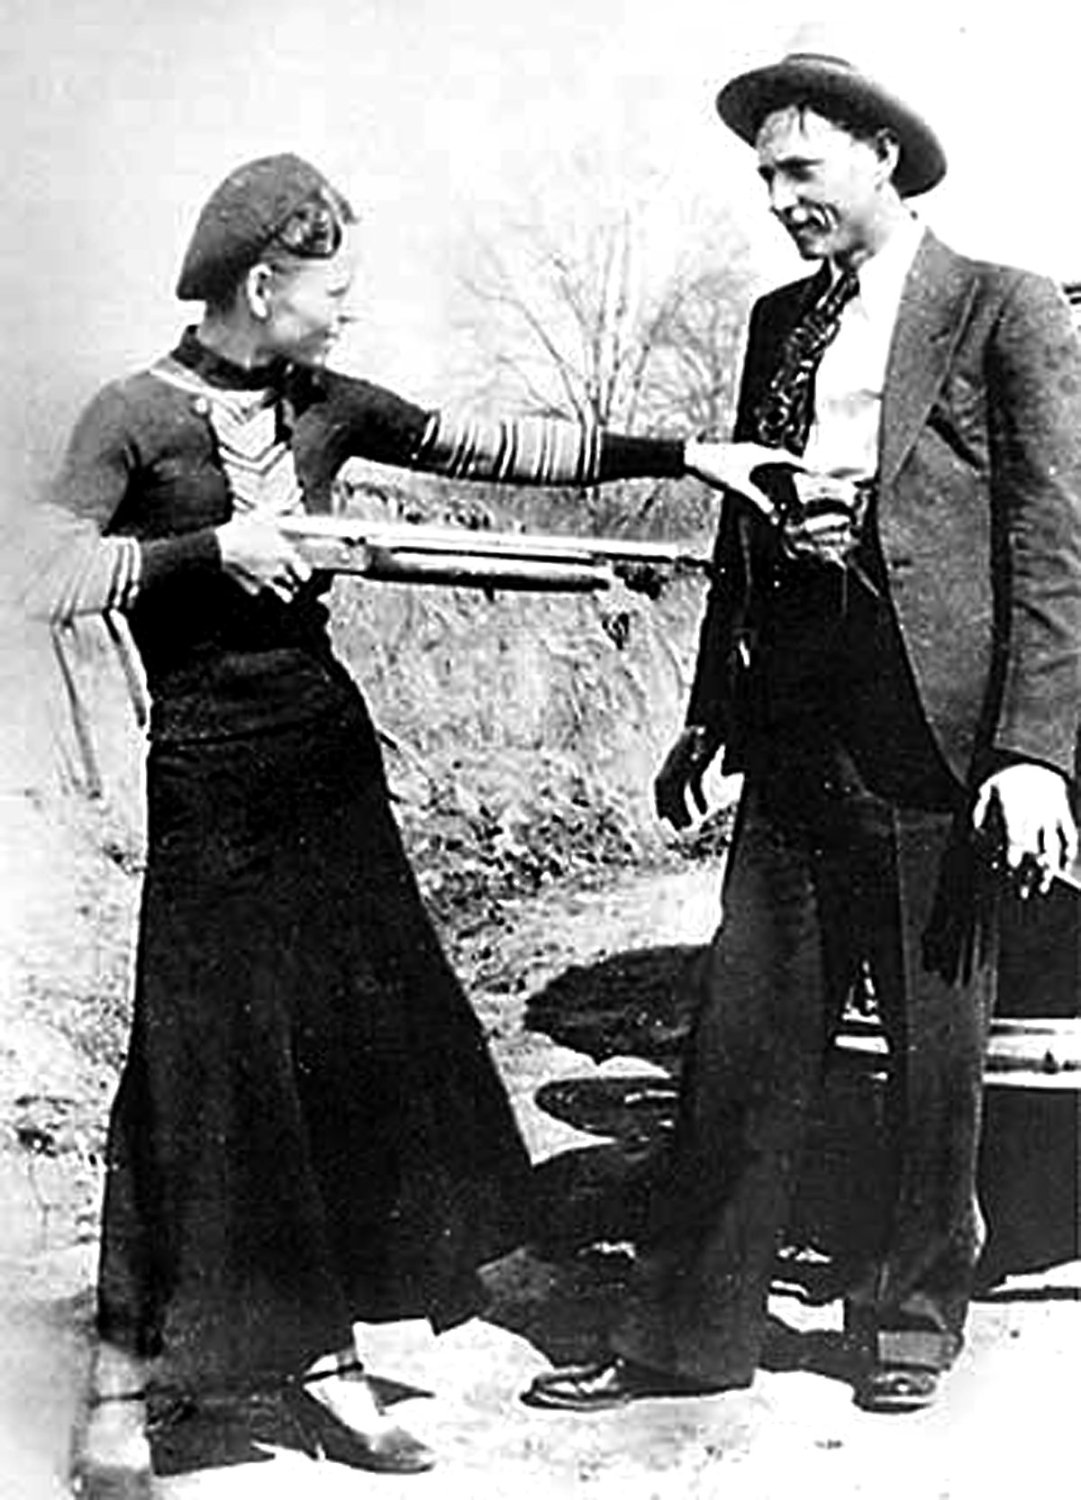 Inside The Gruesome Death Of Bonnie And Clyde At The Hands Of A Trigger Happy Posse